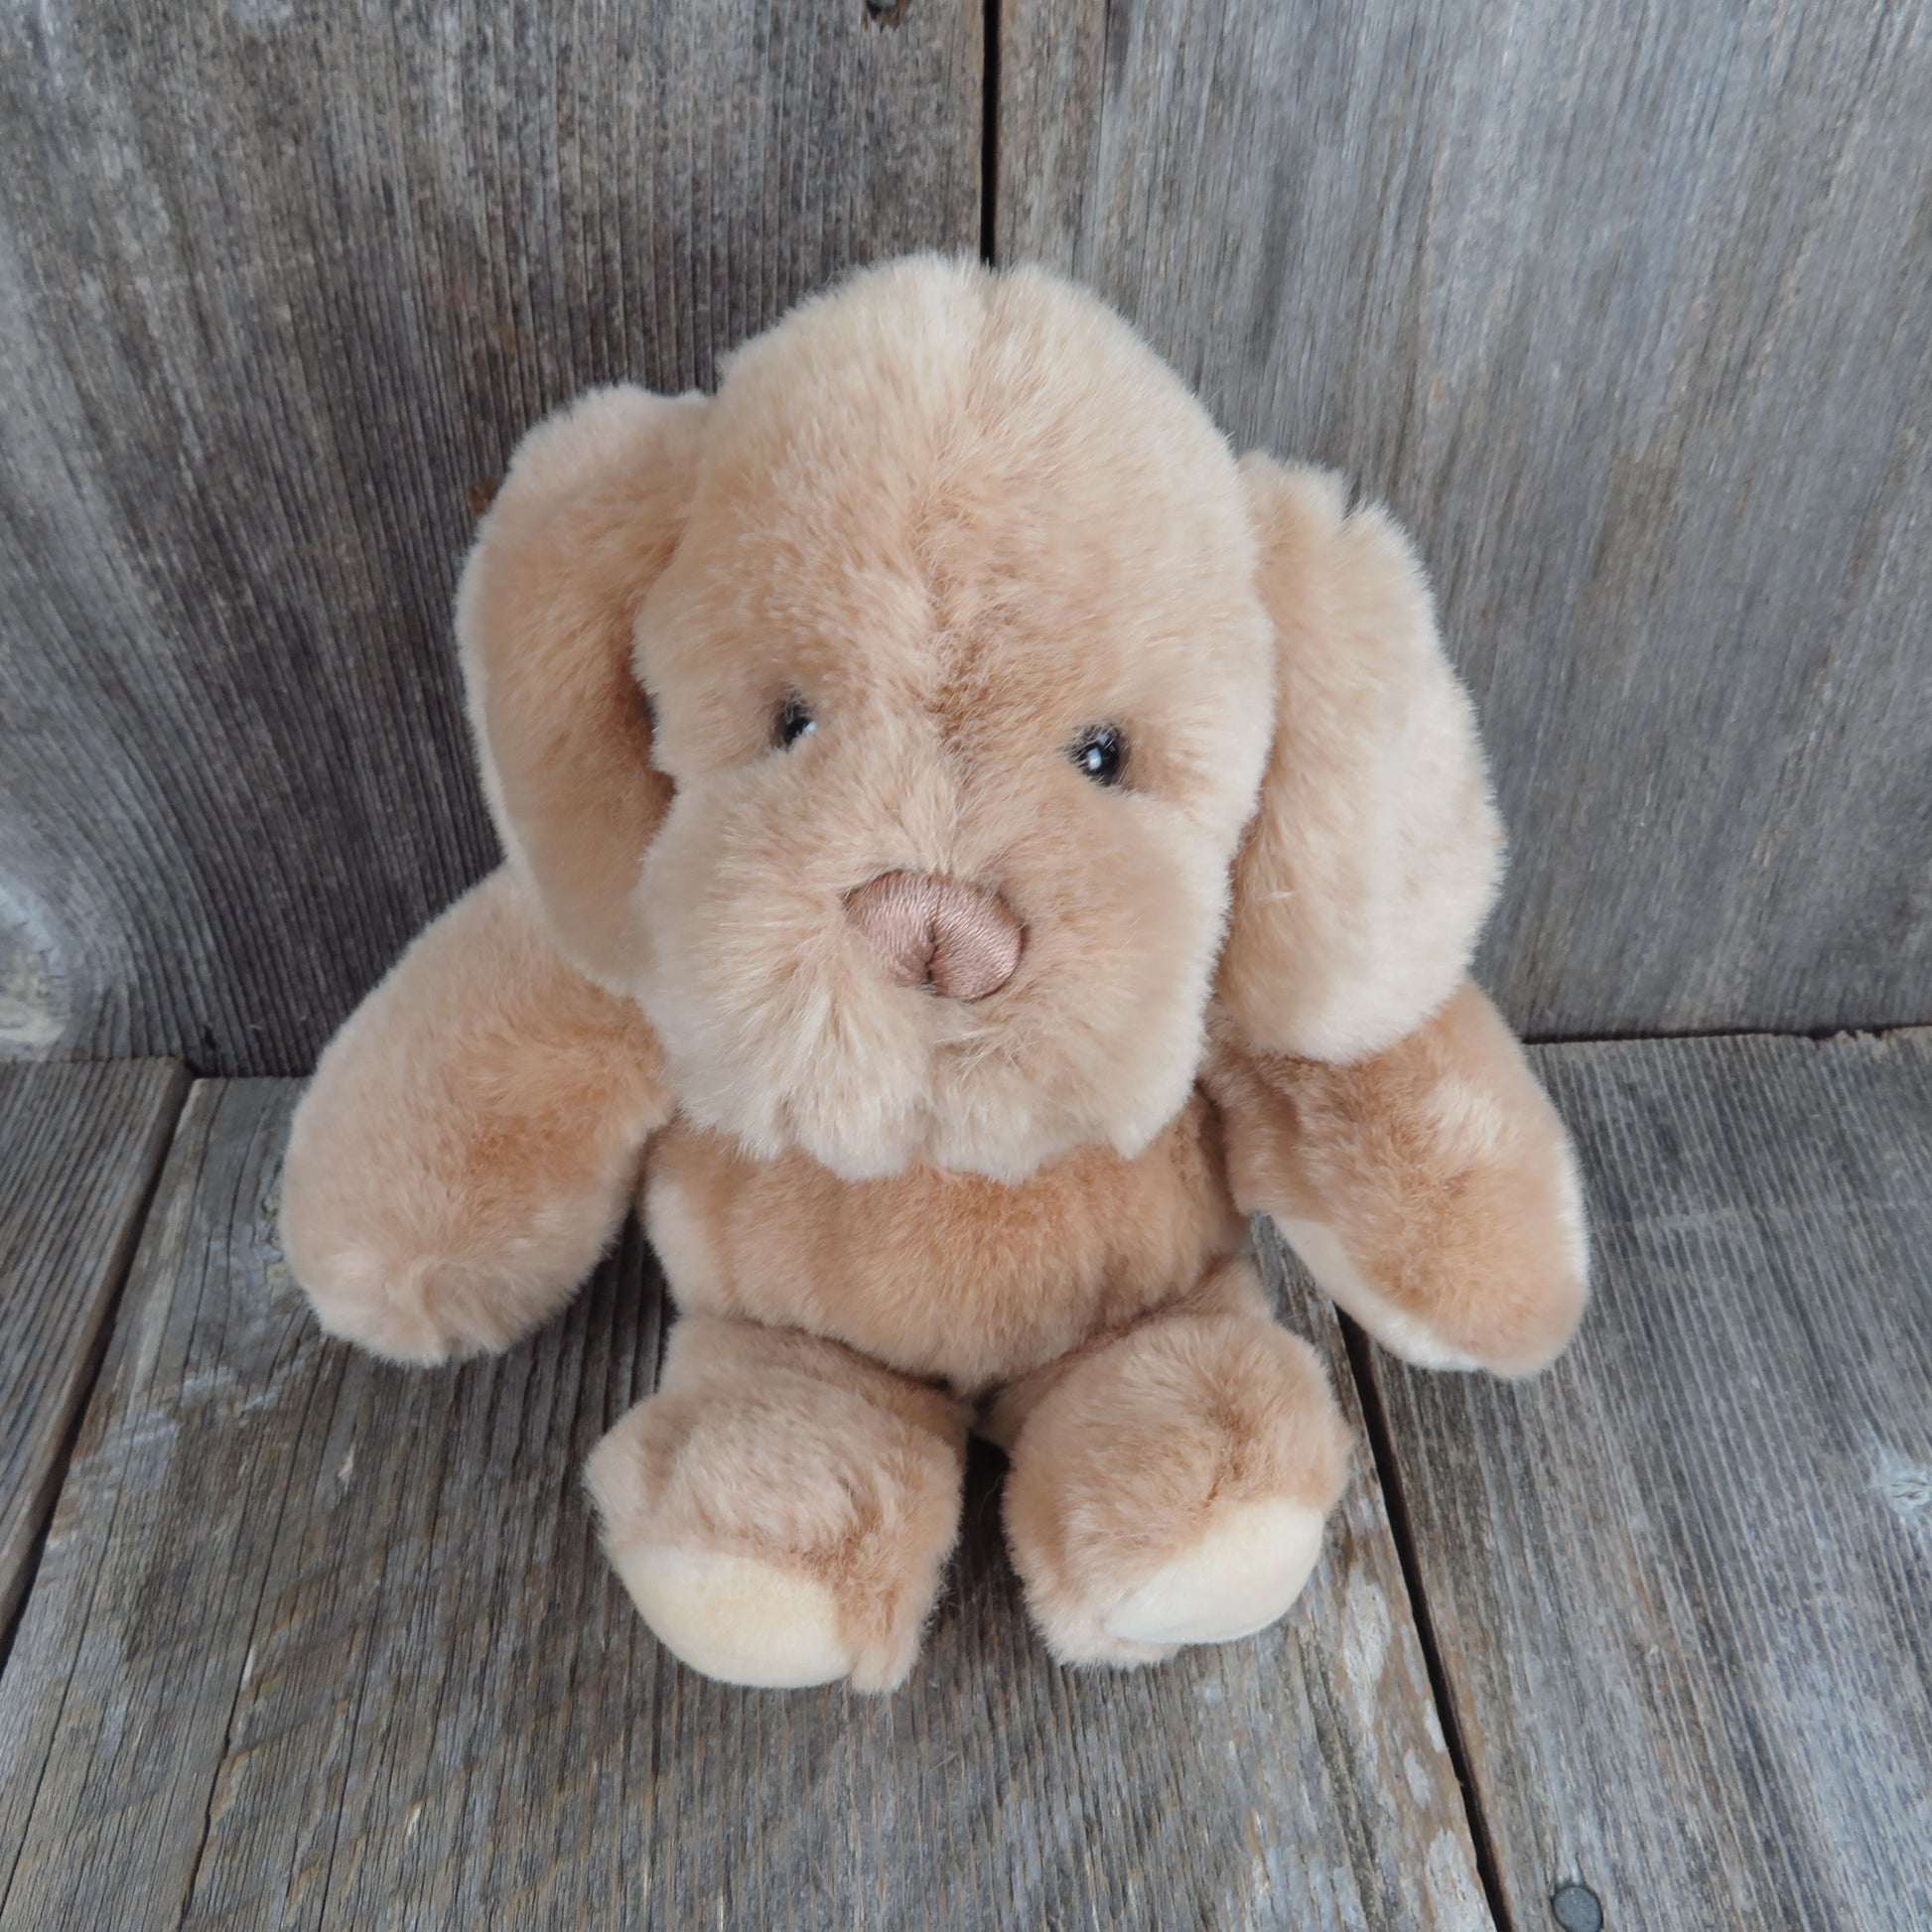 Vintage Puppy Dog Plush Baby Gund Brown Stuffed Animal Floppy Ears Stitched Nose 1990 - At Grandma's Table